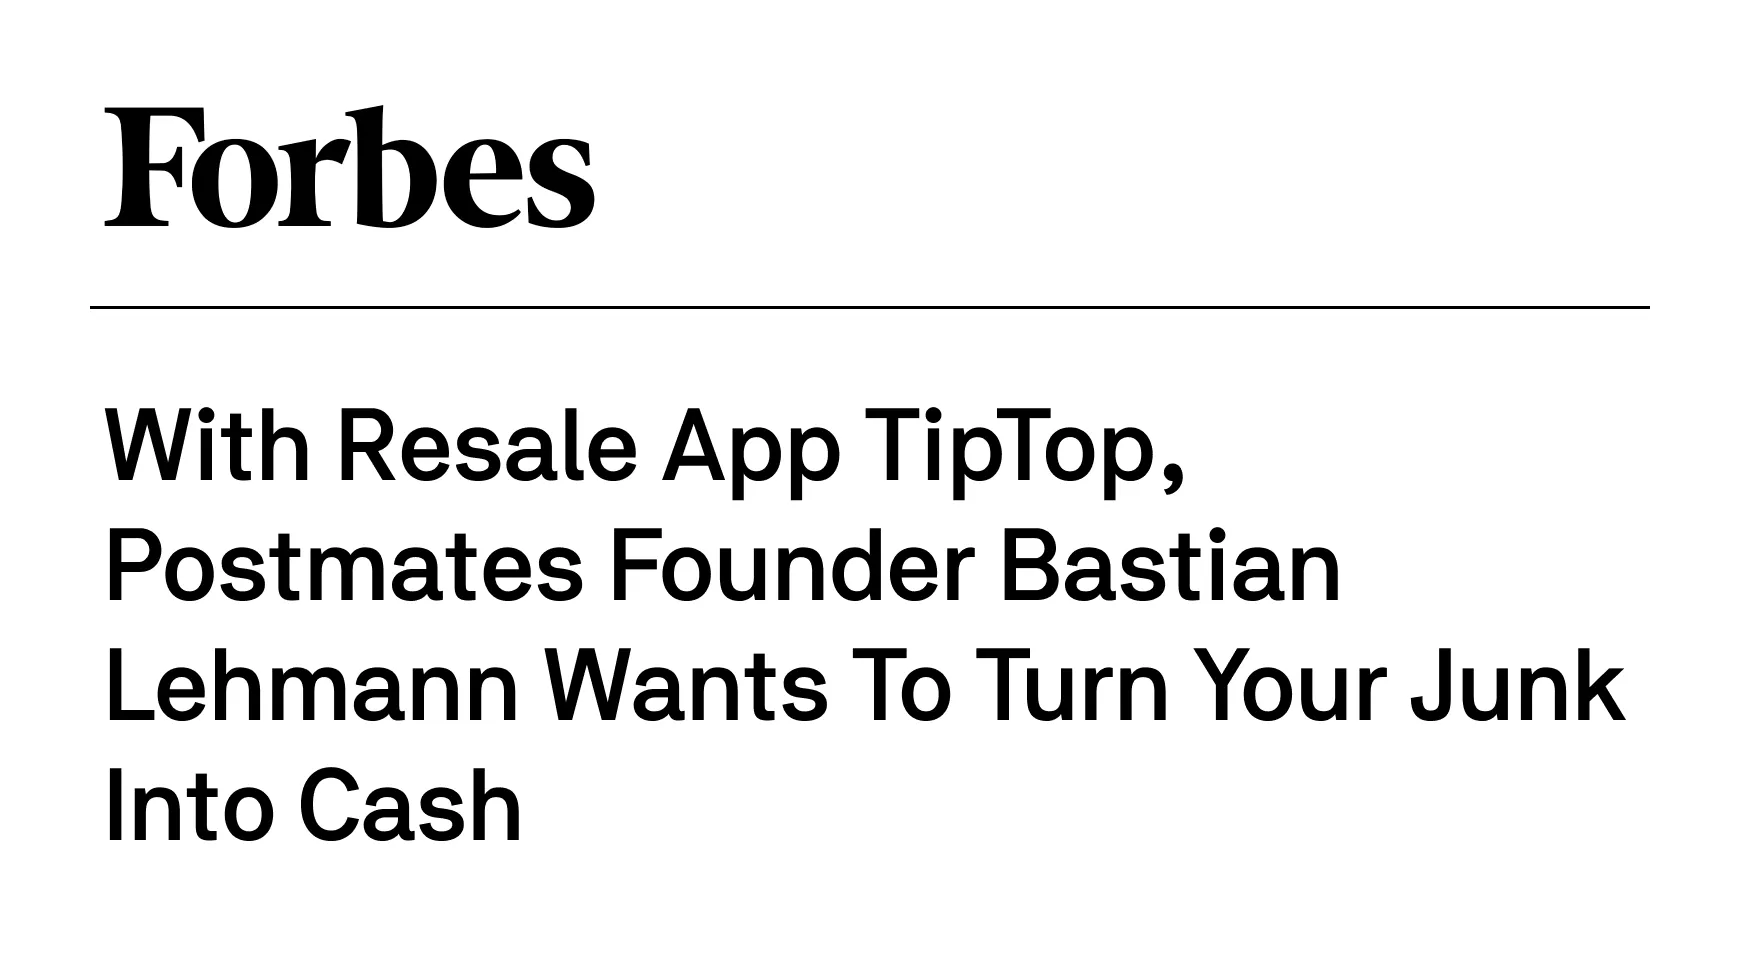 Postmates’ founder’s new app TipTop offers instant cash for your stuff